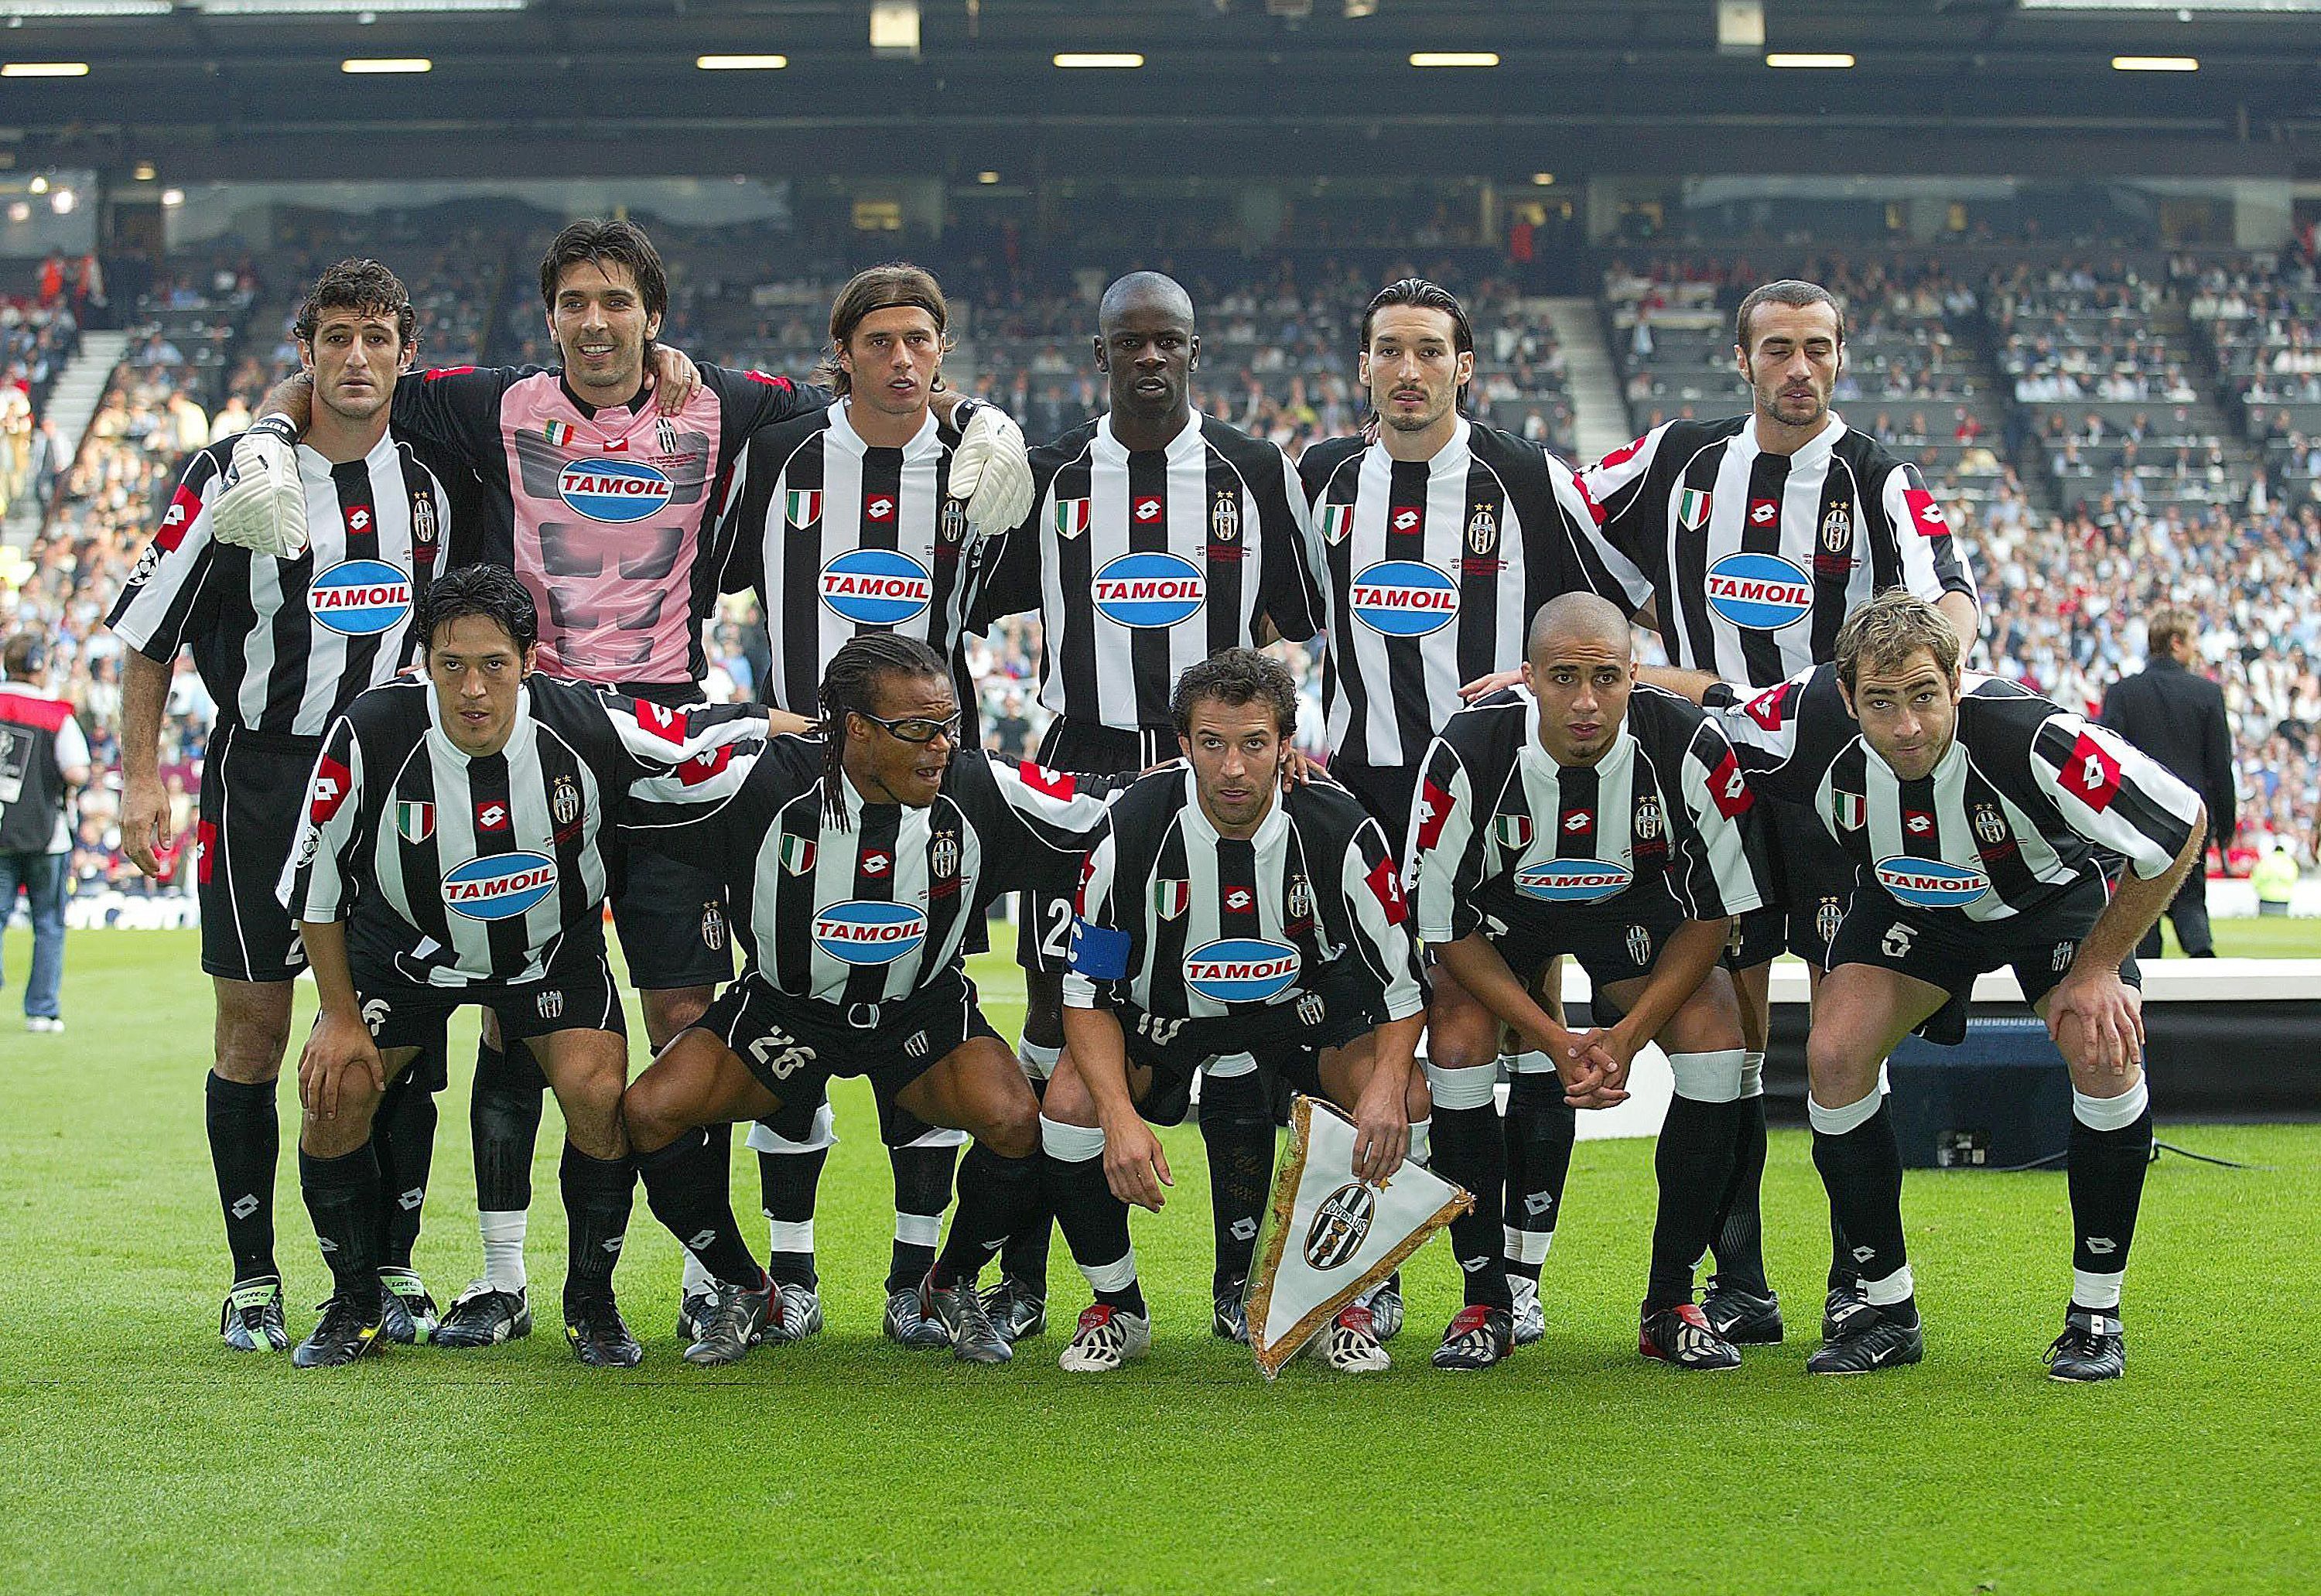 Juventus team line up for the Champions League final vs AC Milan 2003.